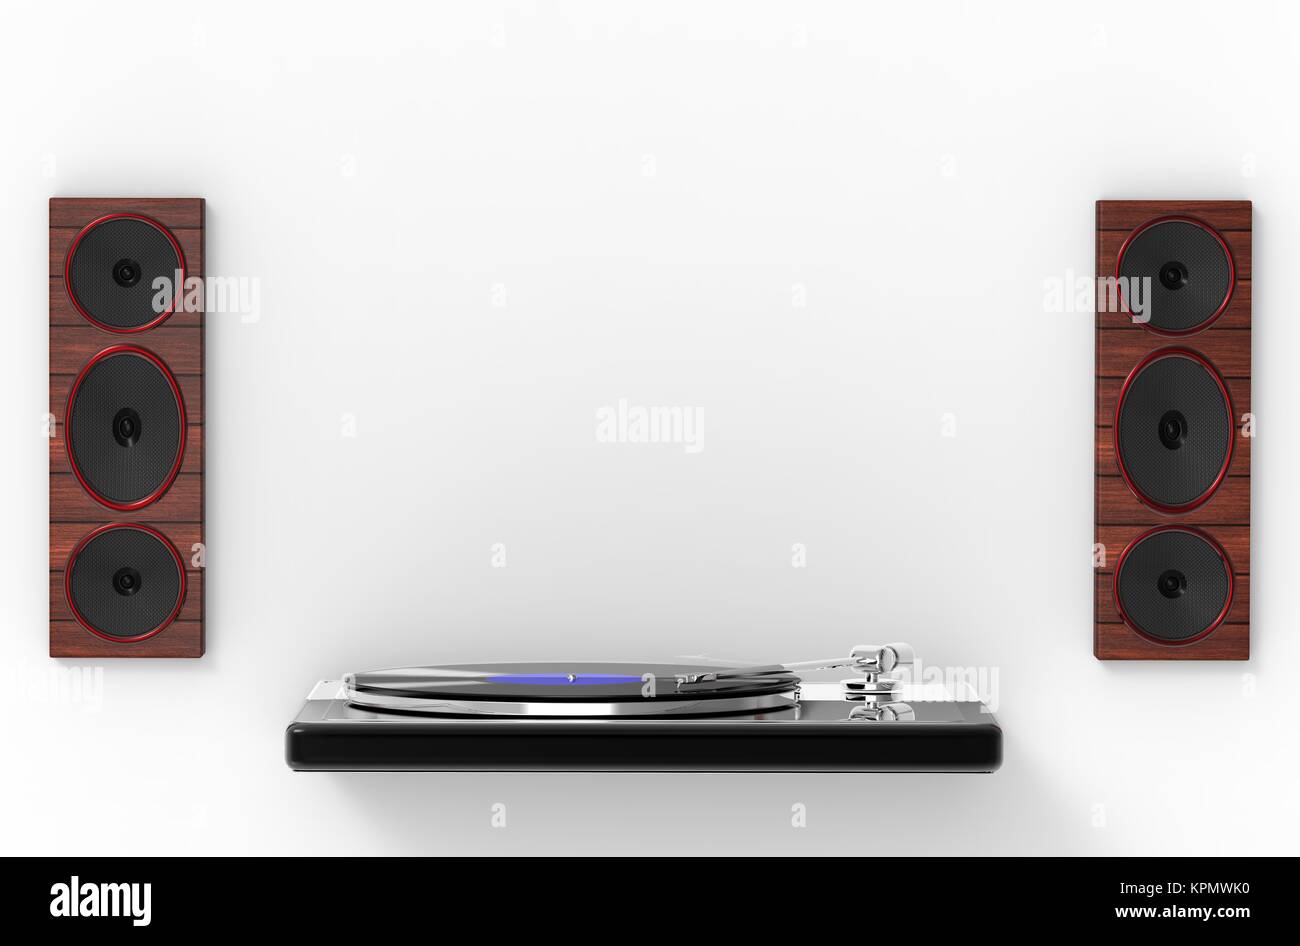 Modern Stereo Turntable Vinyl Record Player isolated with white Stock Photo